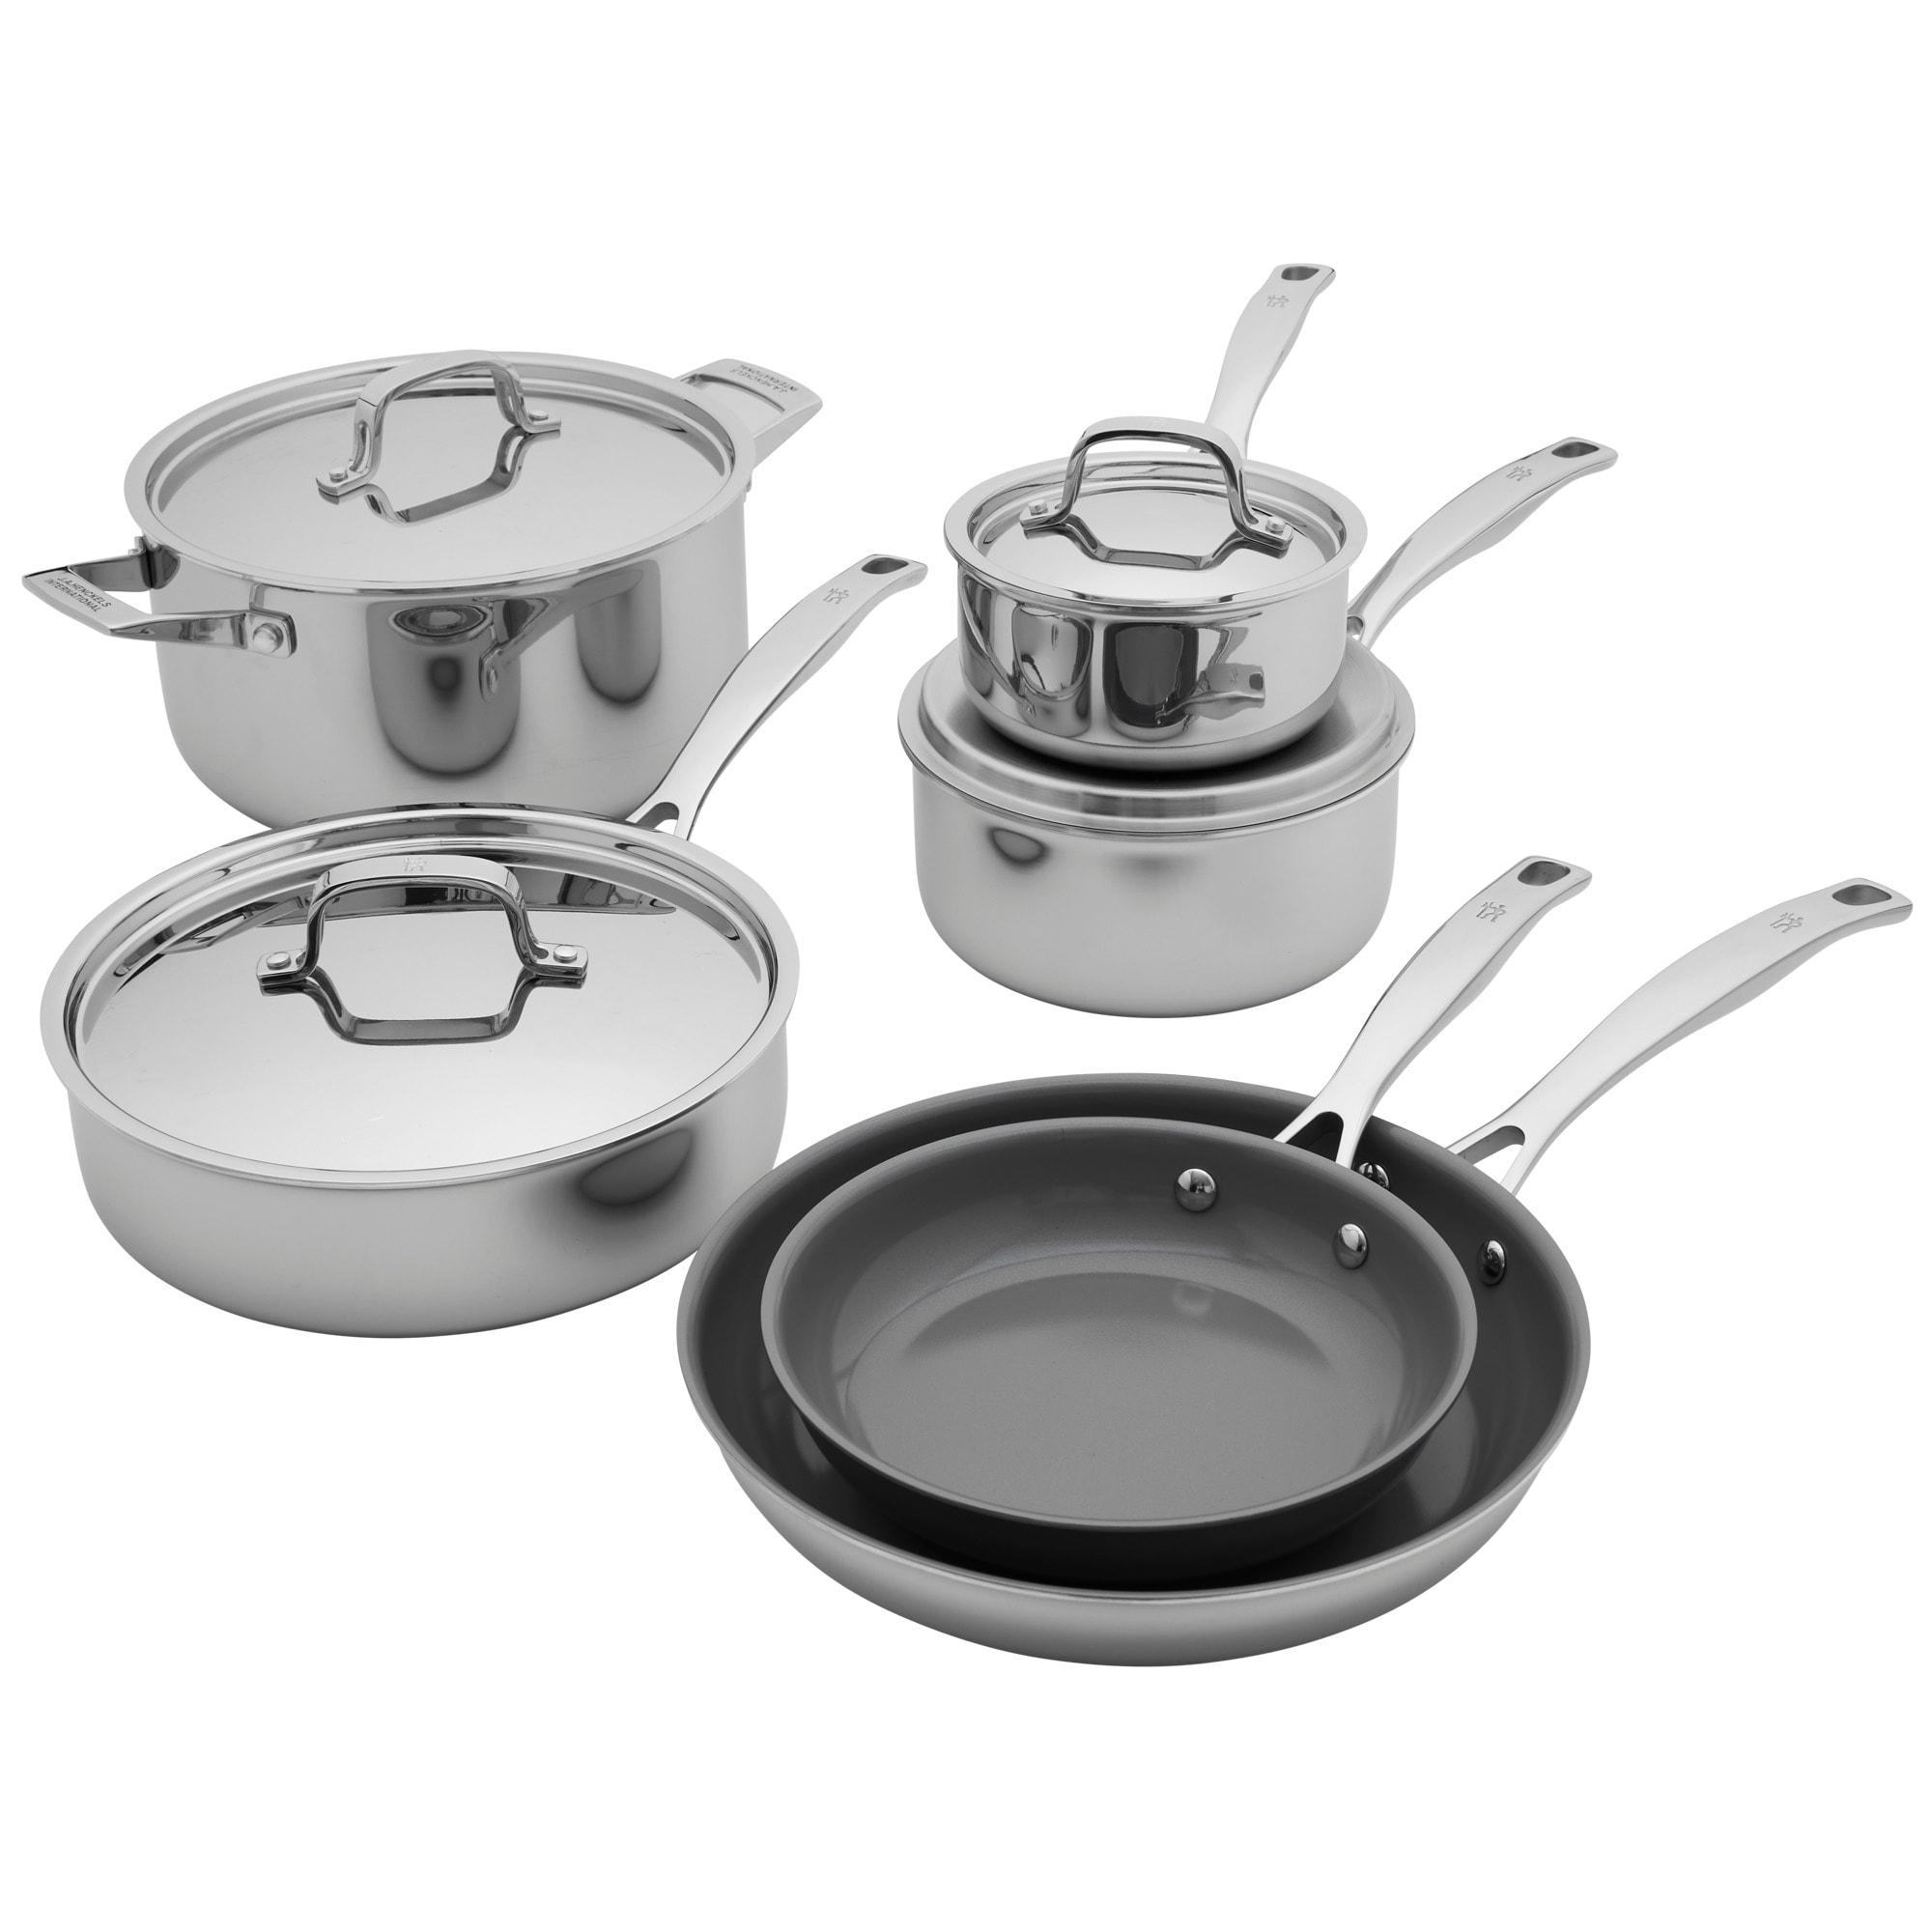 https://ak1.ostkcdn.com/images/products/is/images/direct/33f8069977a5af13b42fc306fabbcc691c82f0ed/Henckels-Clad-Alliance-10-pc-Stainless-Steel-Cookware-Set.jpg